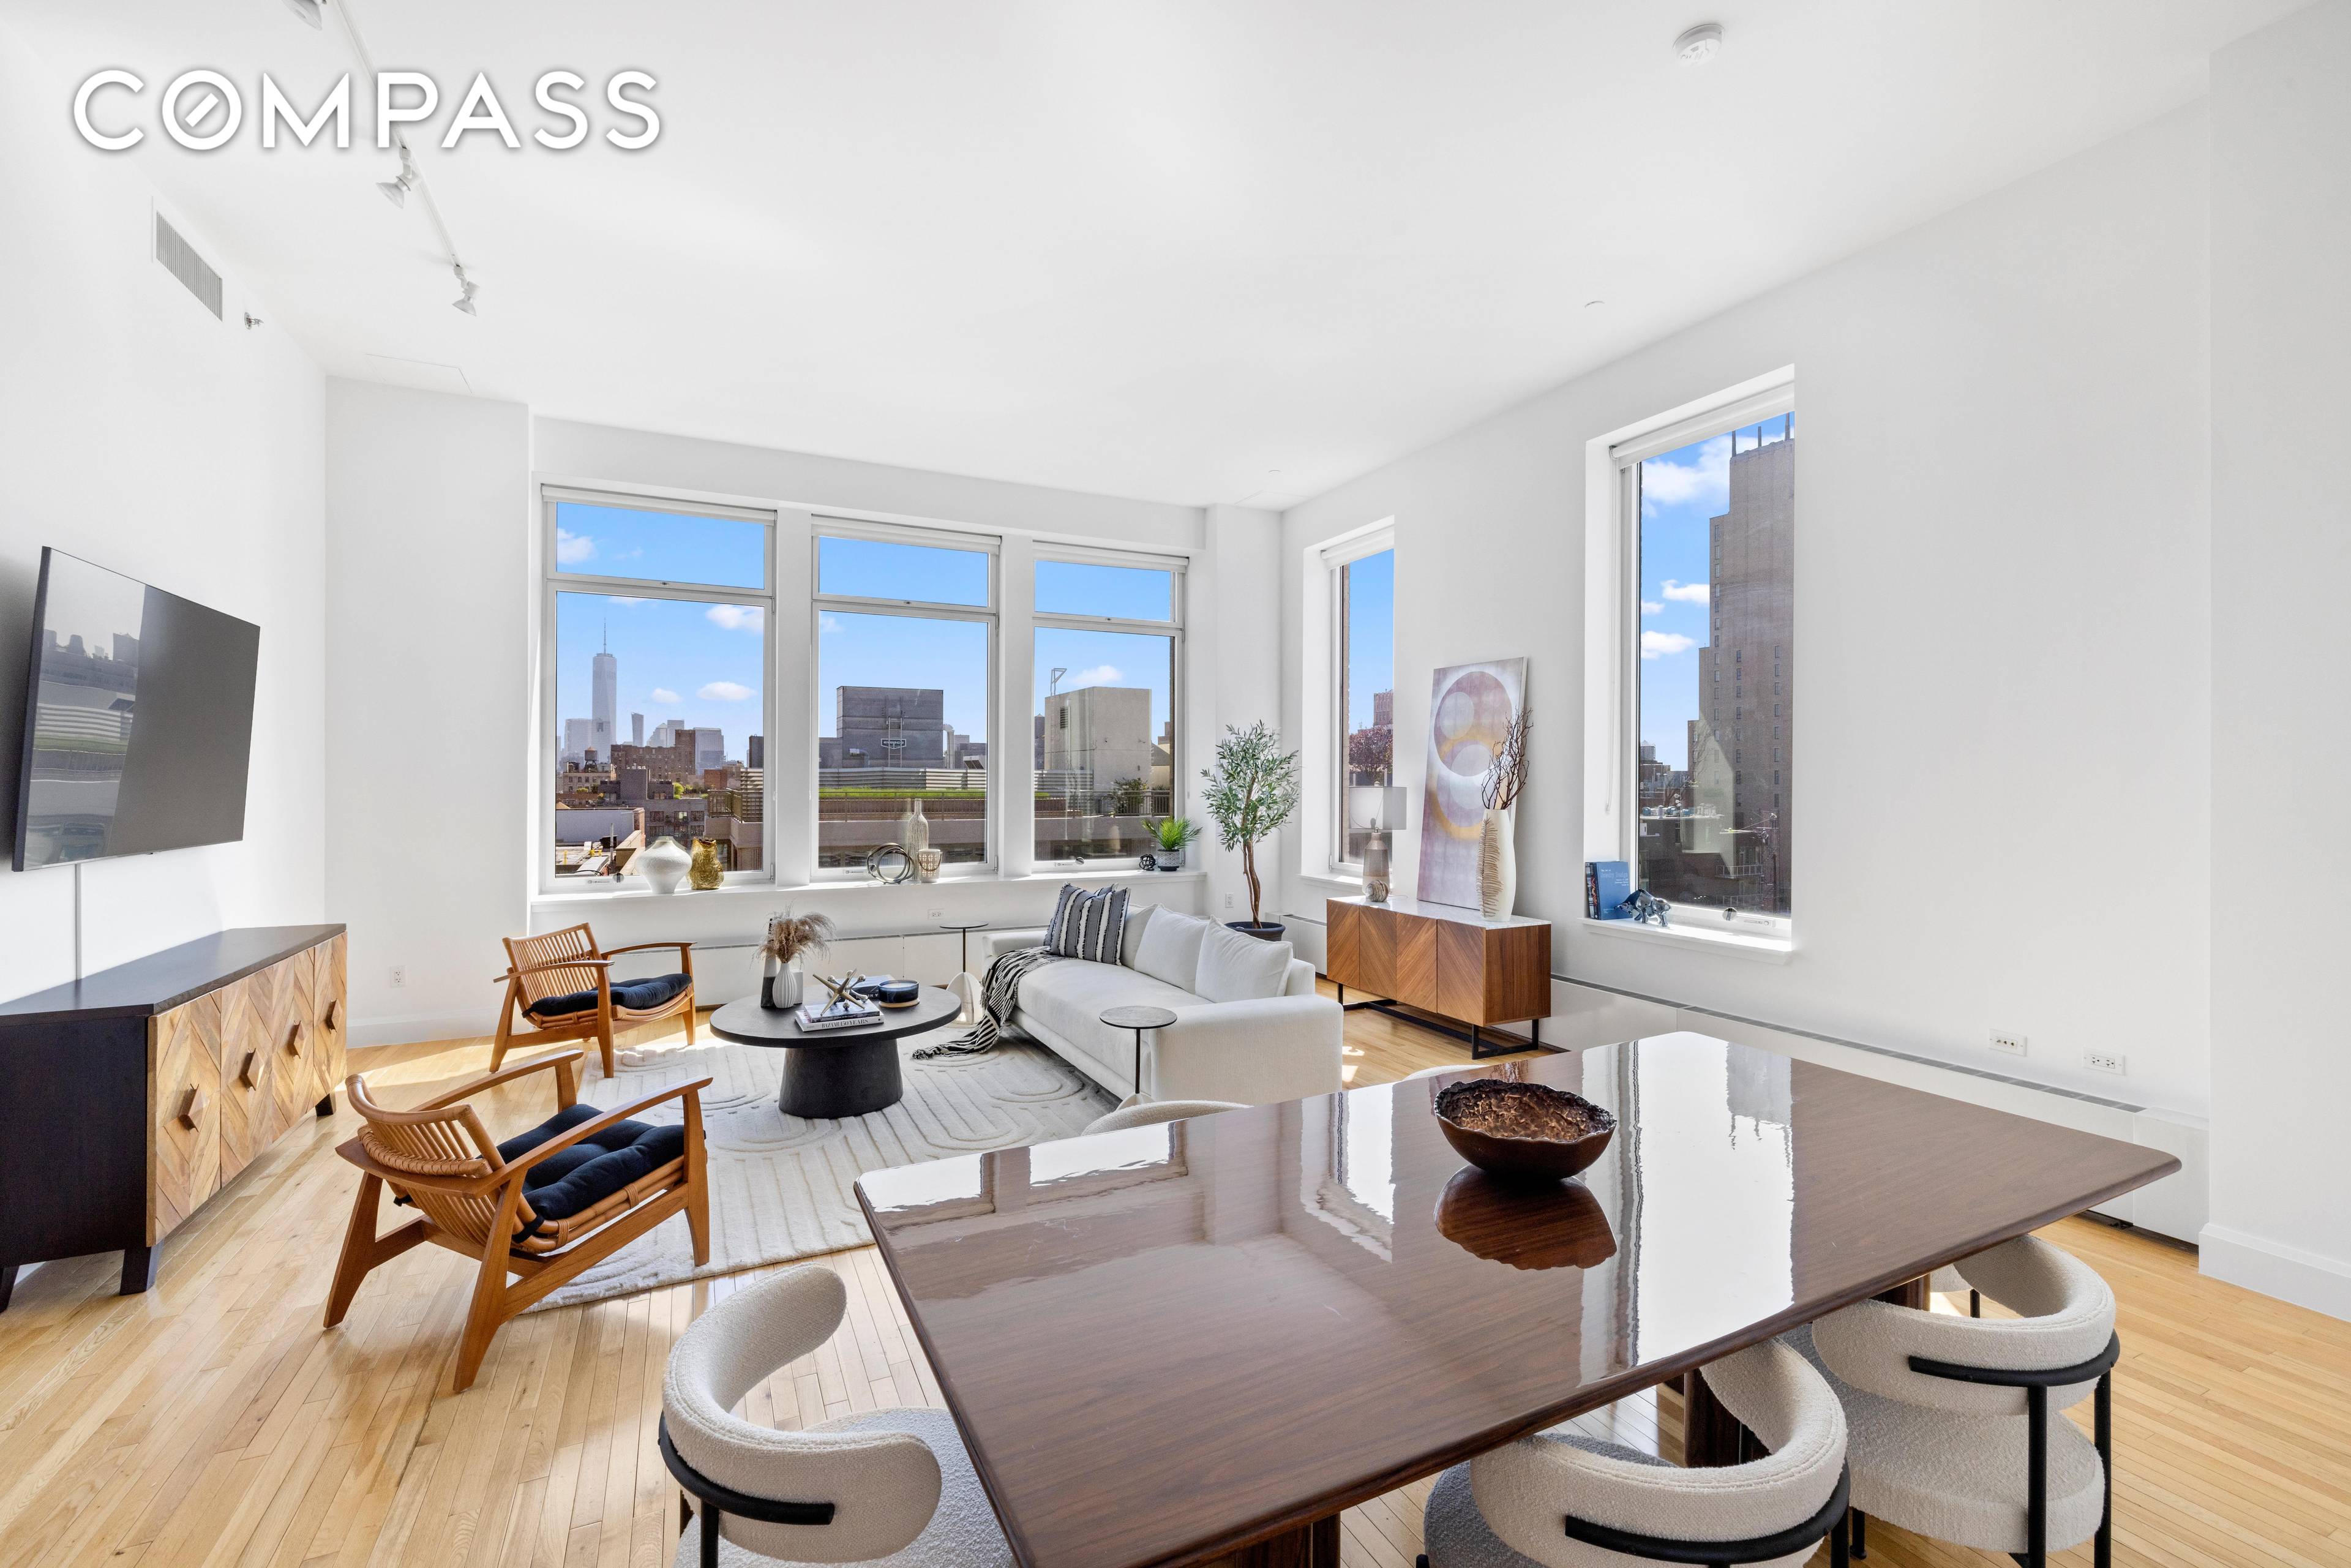 This stunning prewar condominium is located in the heart of Chelsea, and is the perfect place to call home.